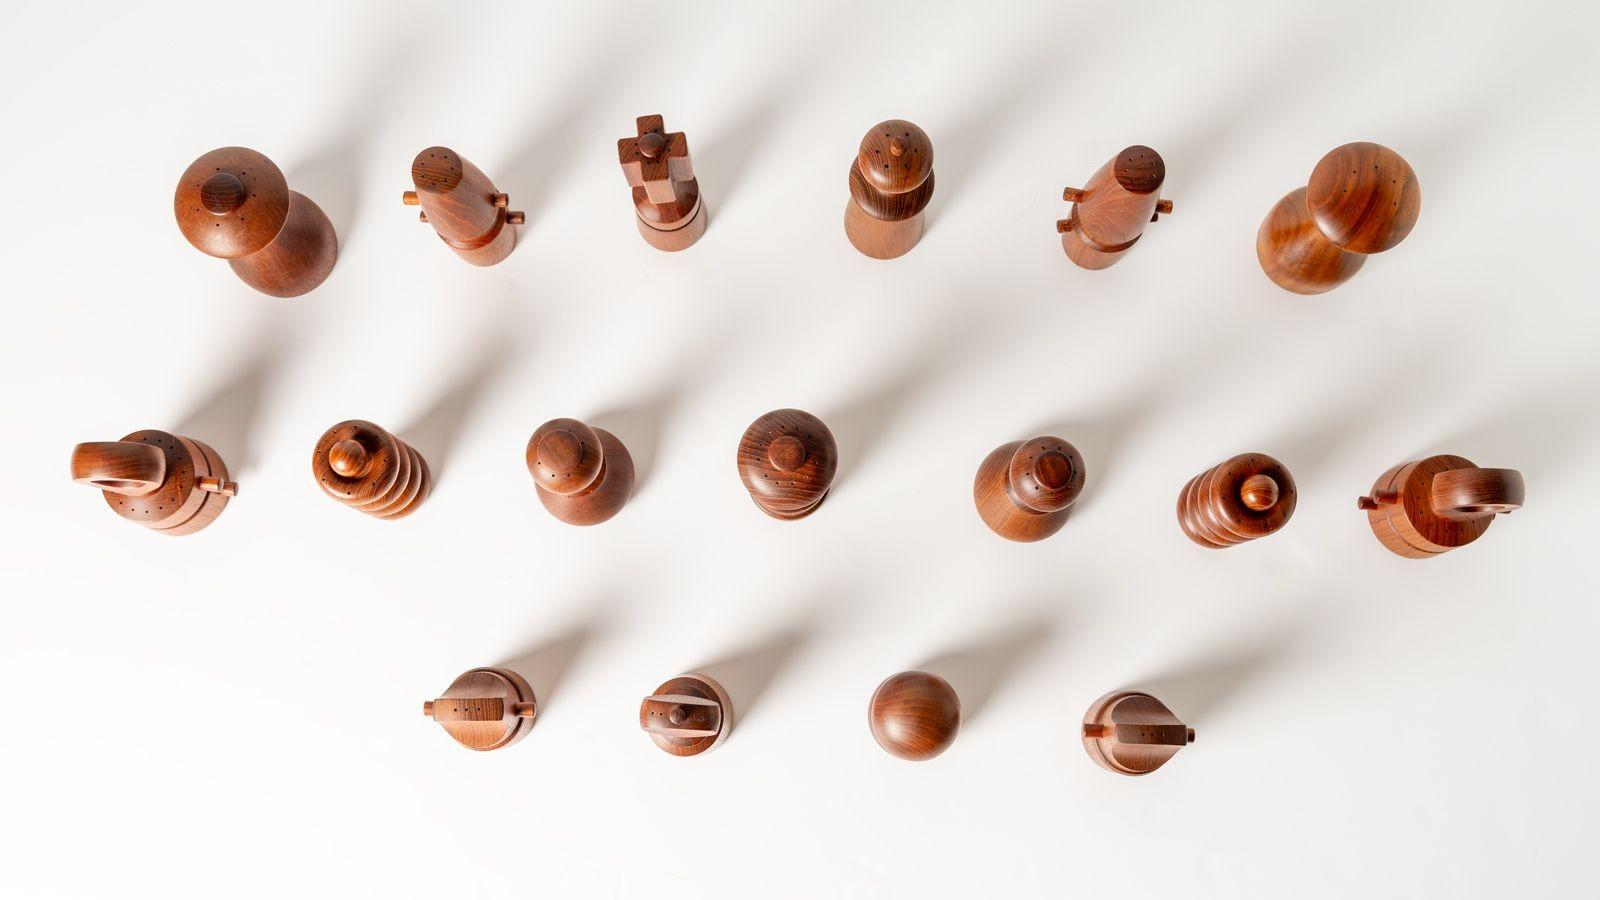 This is a curated collection of Dansk Pepper Mills Designed to be displayed symmetrically to resemble one side of a chess board. All of the grinders are functional and all of the teak has been cleaned and oiled. This collection was accumulated over